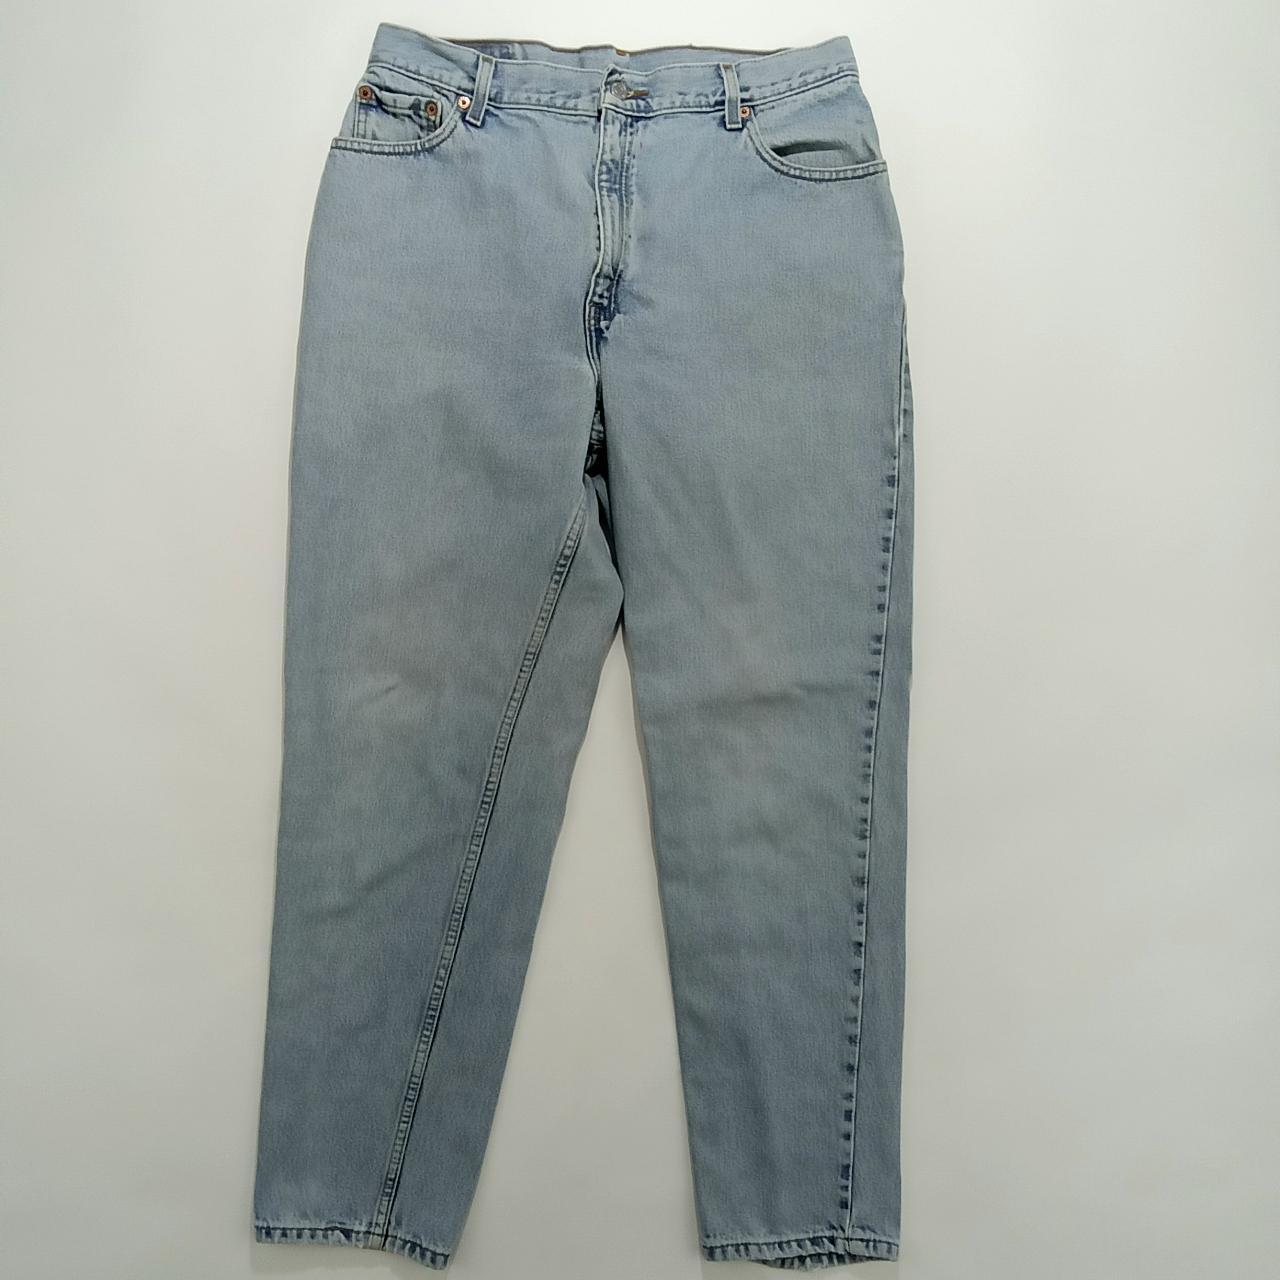 Vintage Levi's 550 Women's Relaxed Tapered Jeans... - Depop